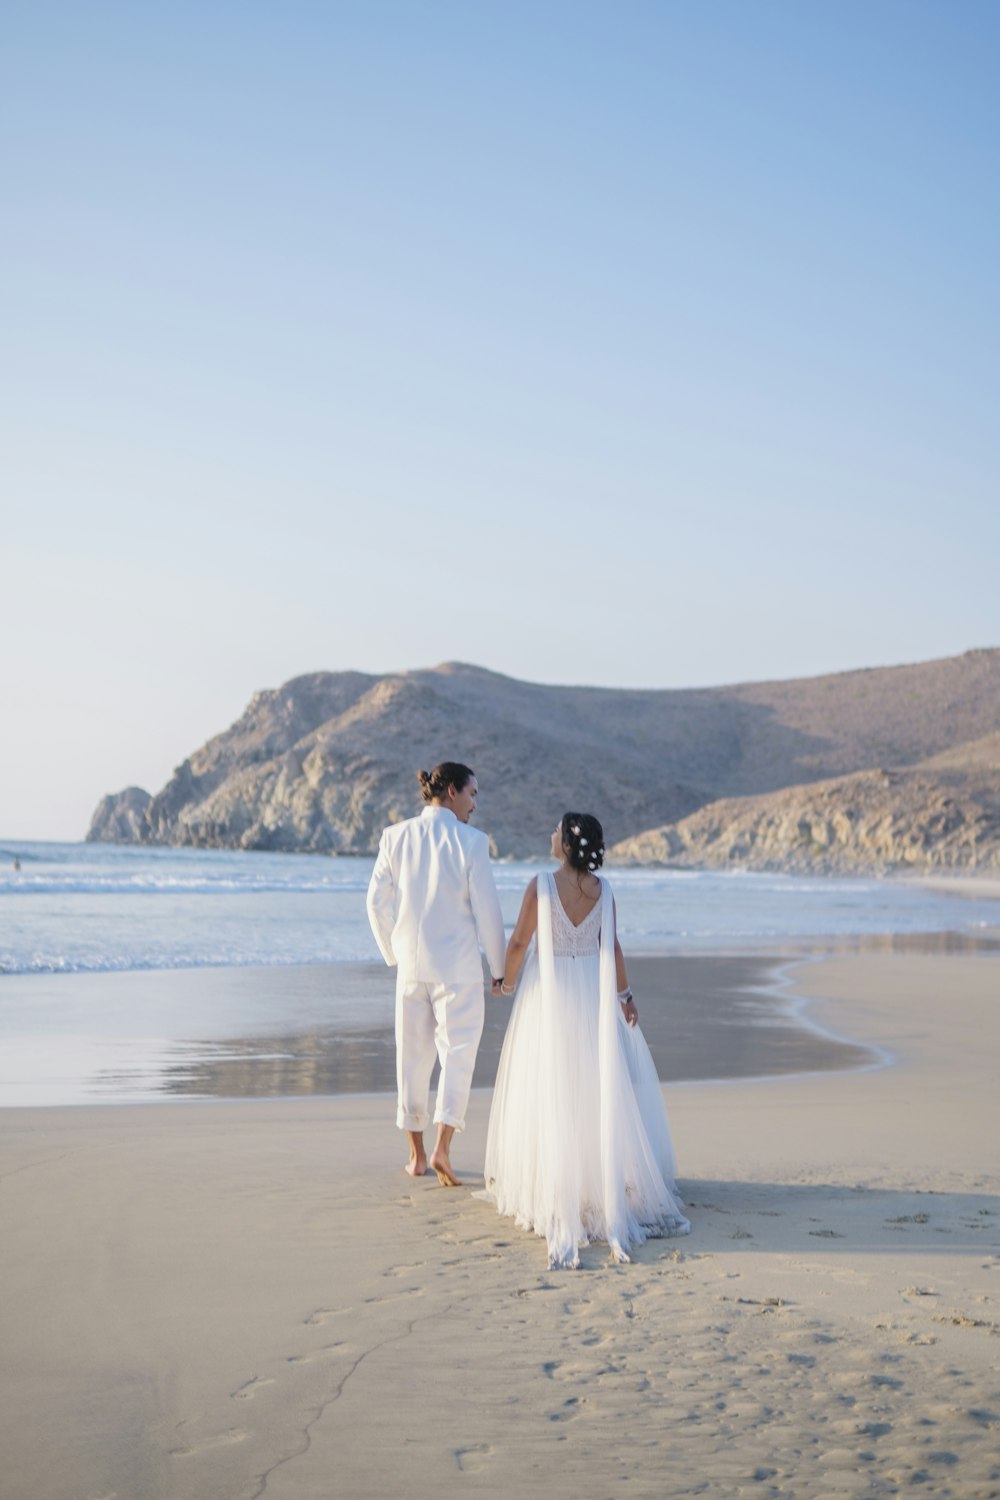 a man and woman in wedding attire on a beach